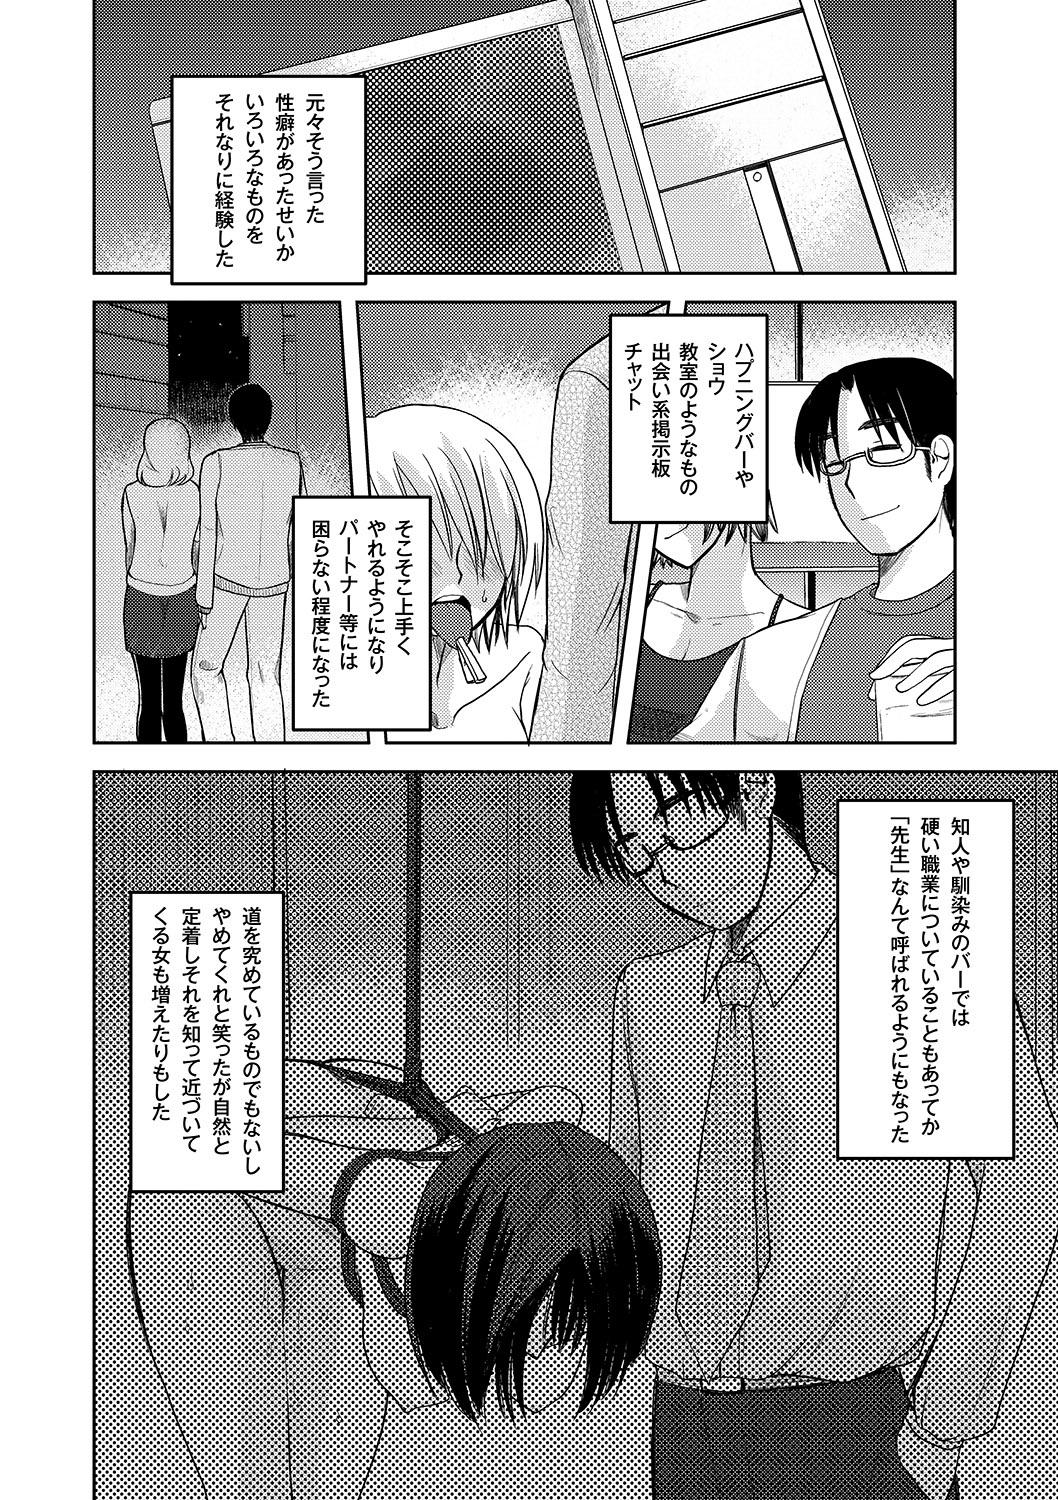 Old Young Zetsubo no kubiwa Ch.1-3 Atm - Page 2